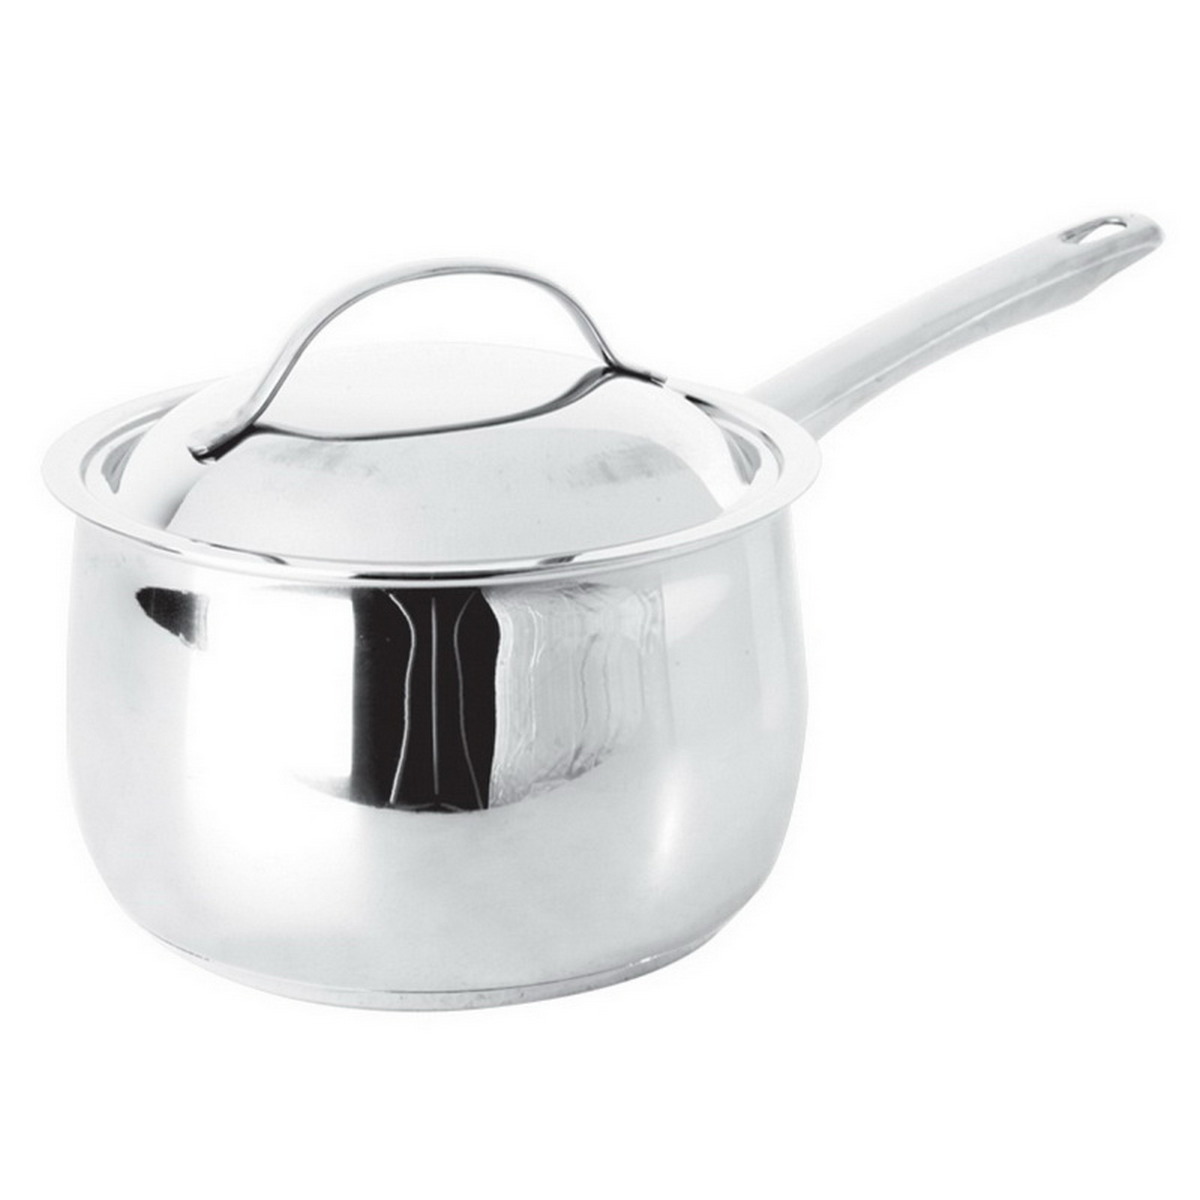 Meyer Stainless Steel Pot With Handle+Lid (16cm,1.89L) 73285-T